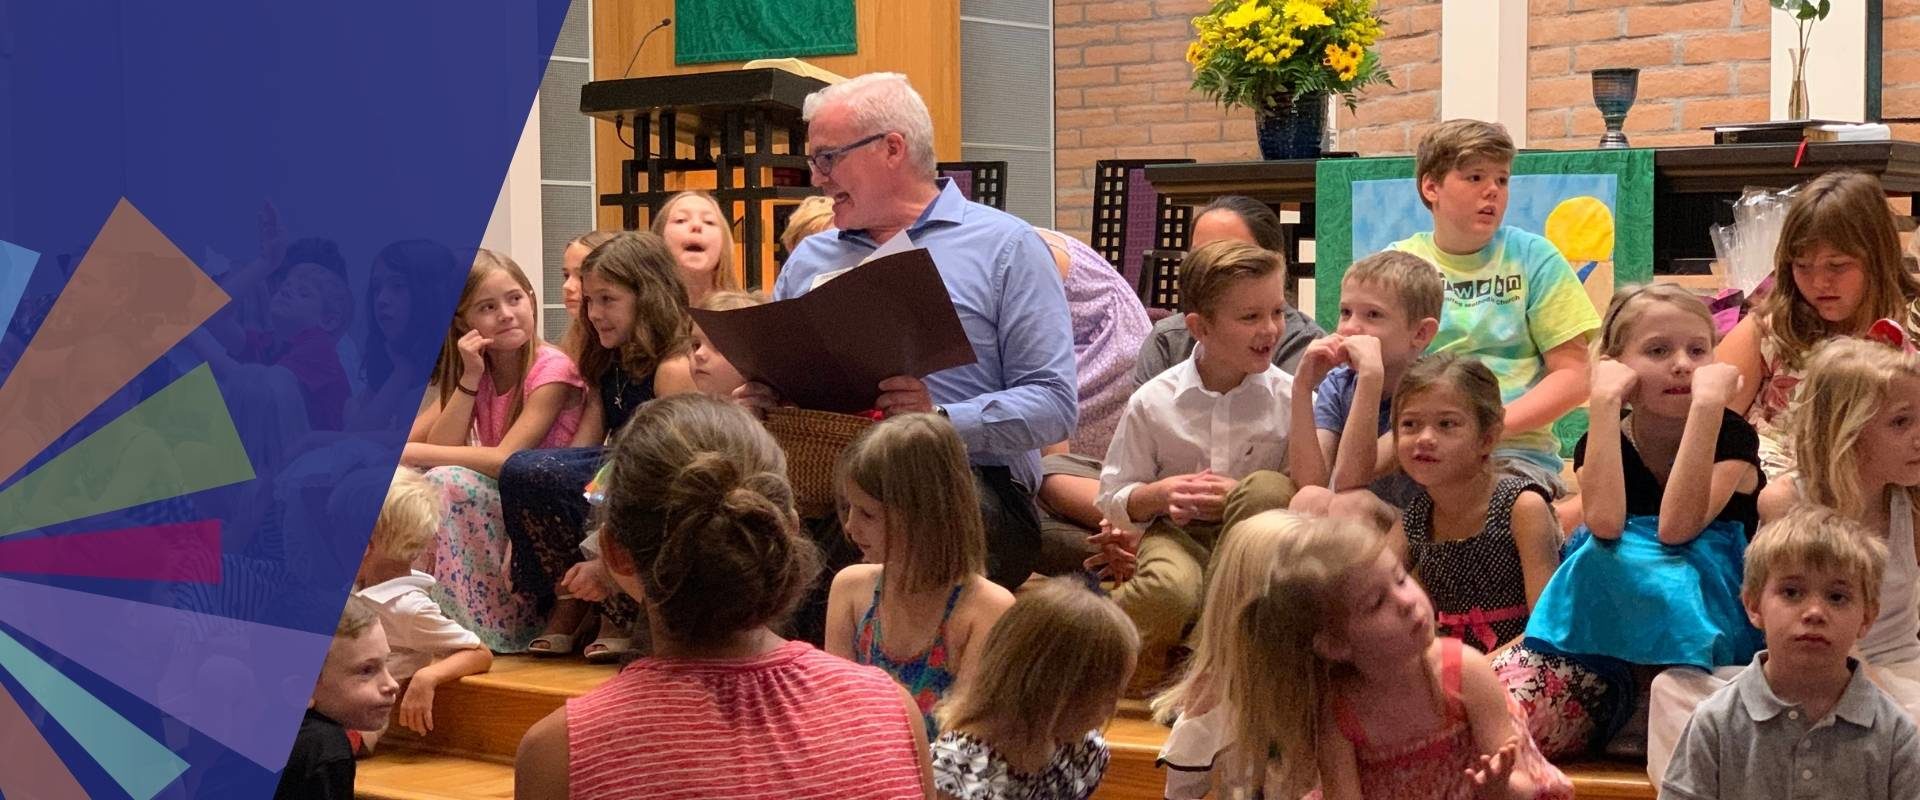 Message: “Easter at Dayspring UMC 2020” from Dayspring